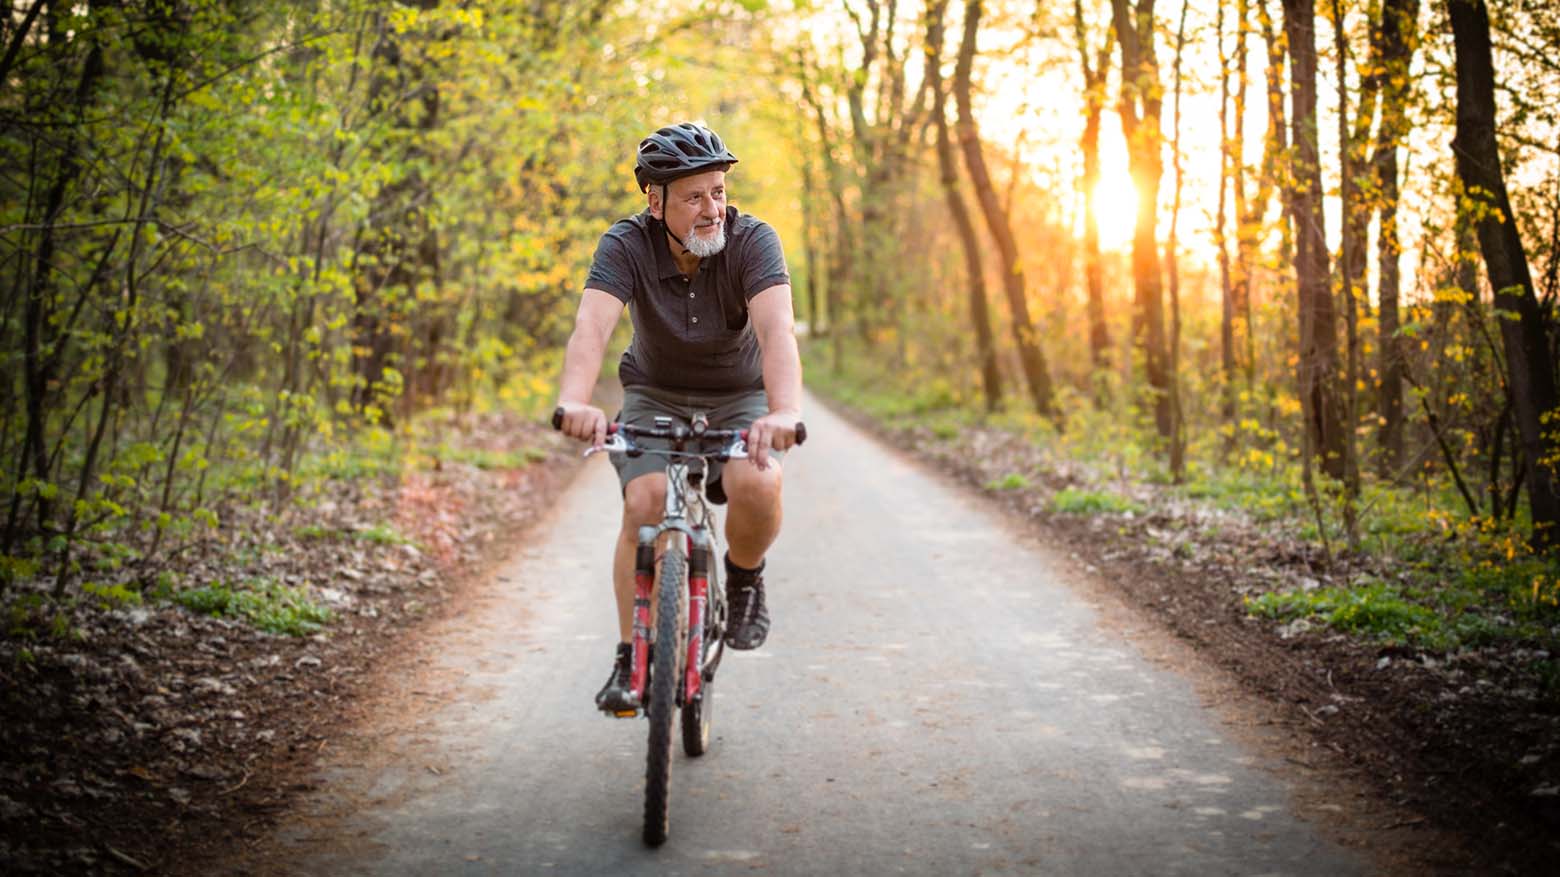 An older man rides a bicycle through a nature trail